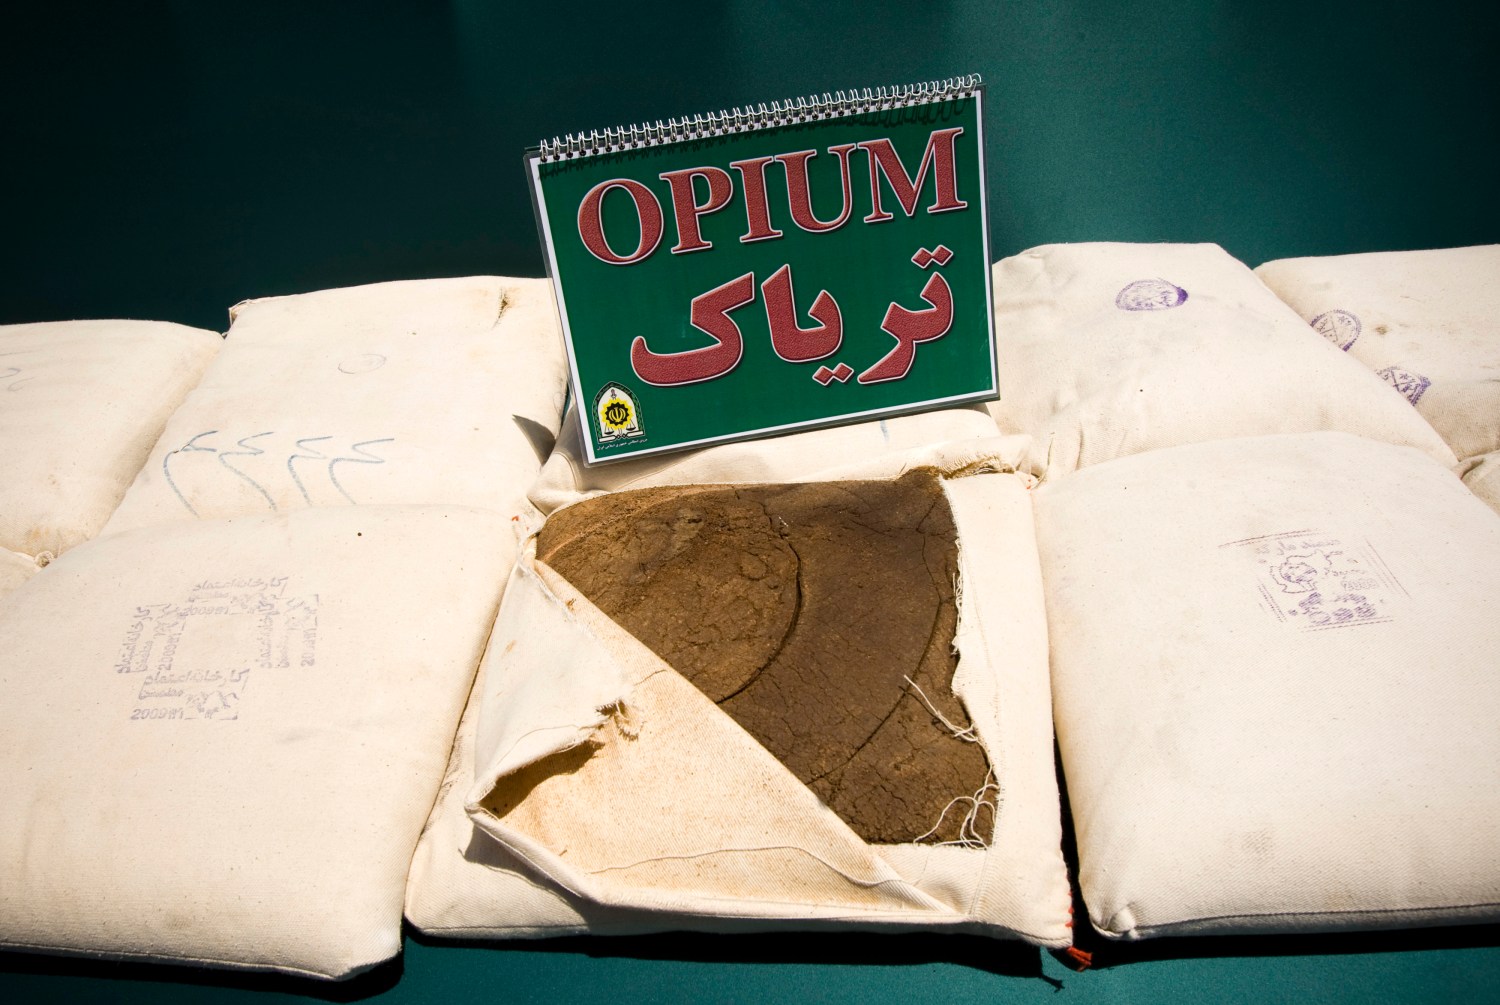 Confiscated opium is seen on display during a ceremony concluding anti-narcotics manoeuvres in Zahedan, 1,605 kilometers (1,003 miles) southeast of Tehran May 20, 2009. The head of the U.N. crime agency praised Iran during a visit on Wednesday for curbing the flow of smuggled heroin from Afghanistan and helping keep the drug off Western streets.  Picture taken May 20, 2009.  REUTERS/Caren Firouz (IRAN CRIME LAW POLITICS SOCIETY) - GM1E55L1AOY01